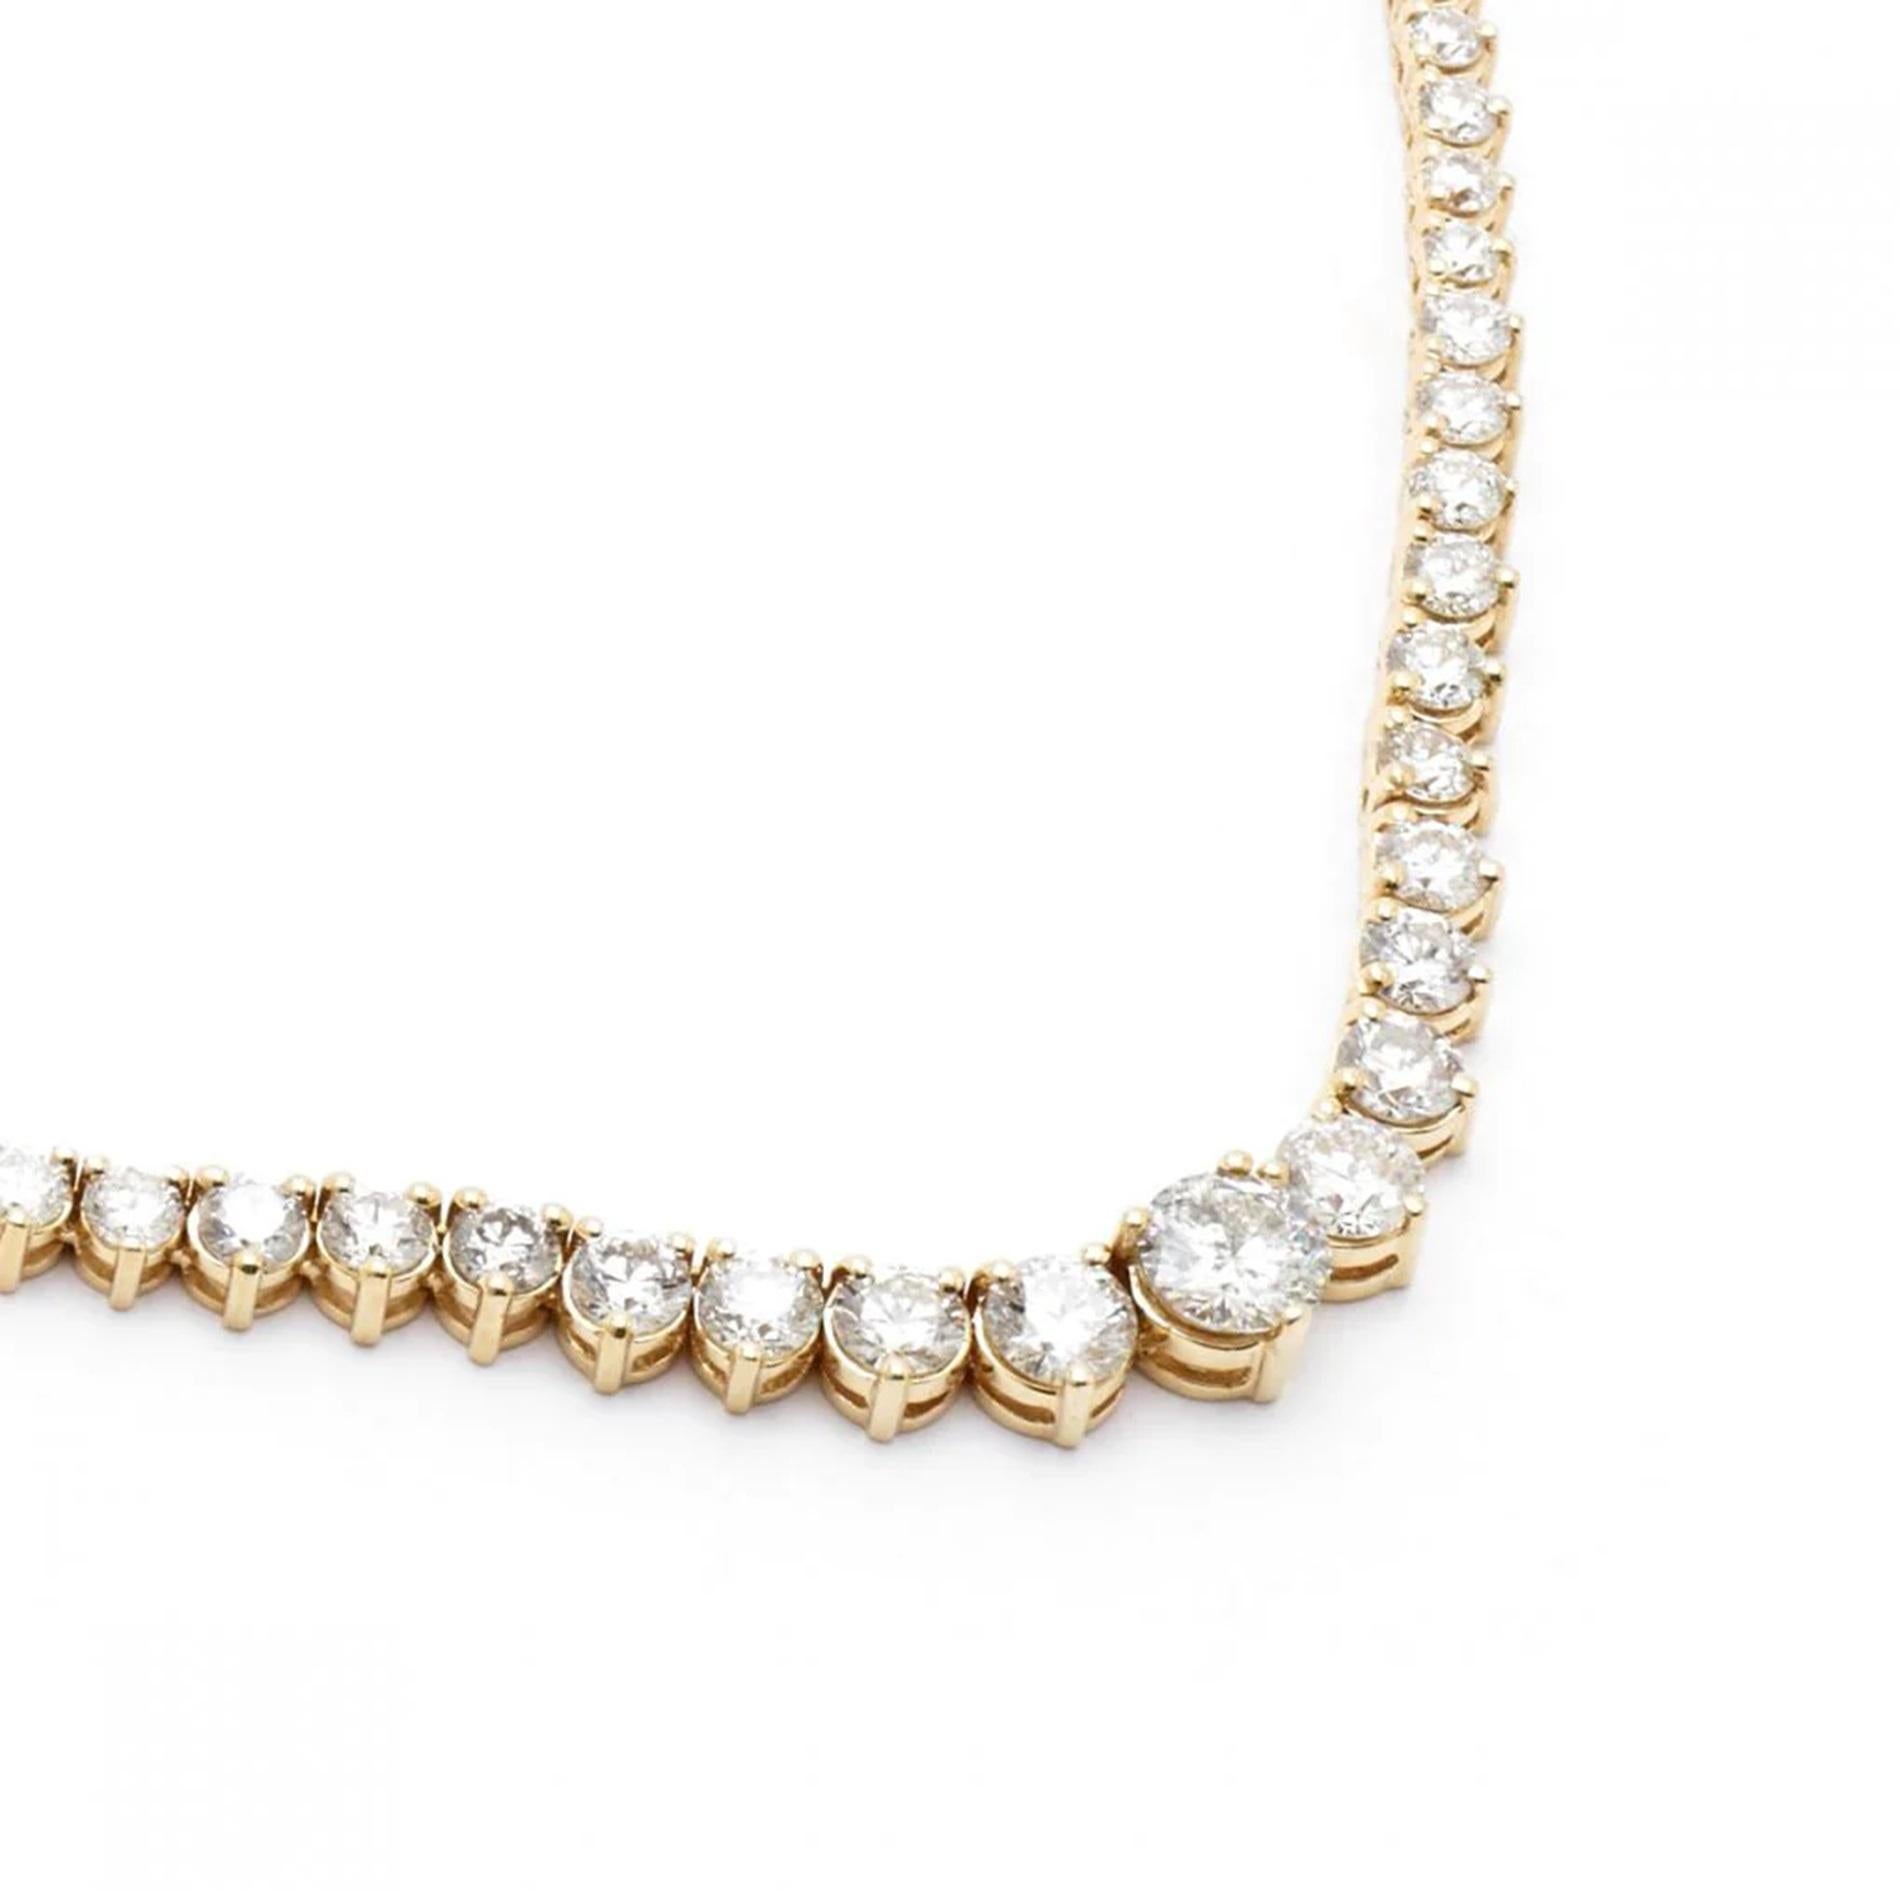 Riviera 11.20 Carat Diamond Necklace 18k In New Condition For Sale In Rome, IT